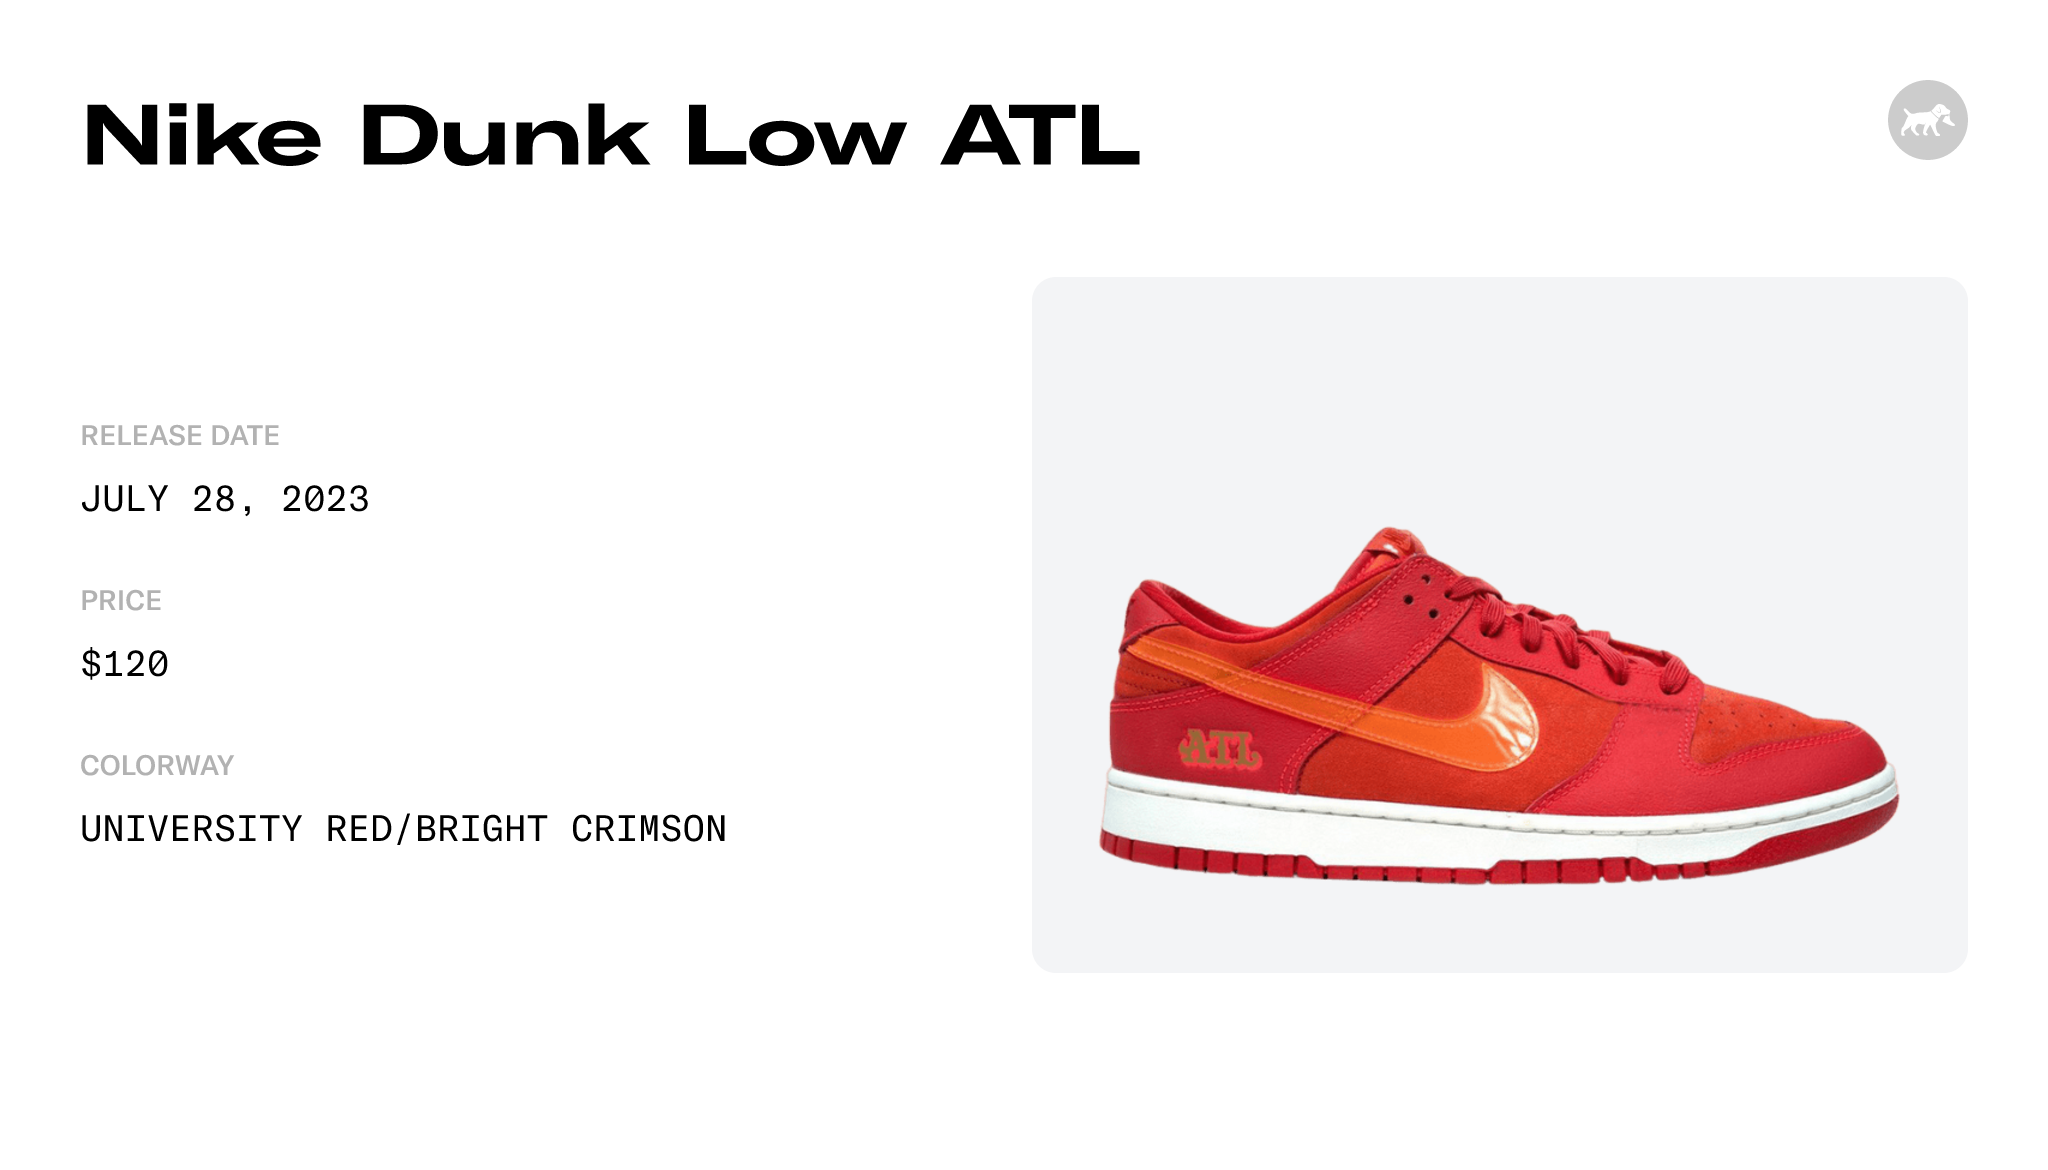 Nike Dunk Low ATL - FD0724-657 Raffles and Release Date